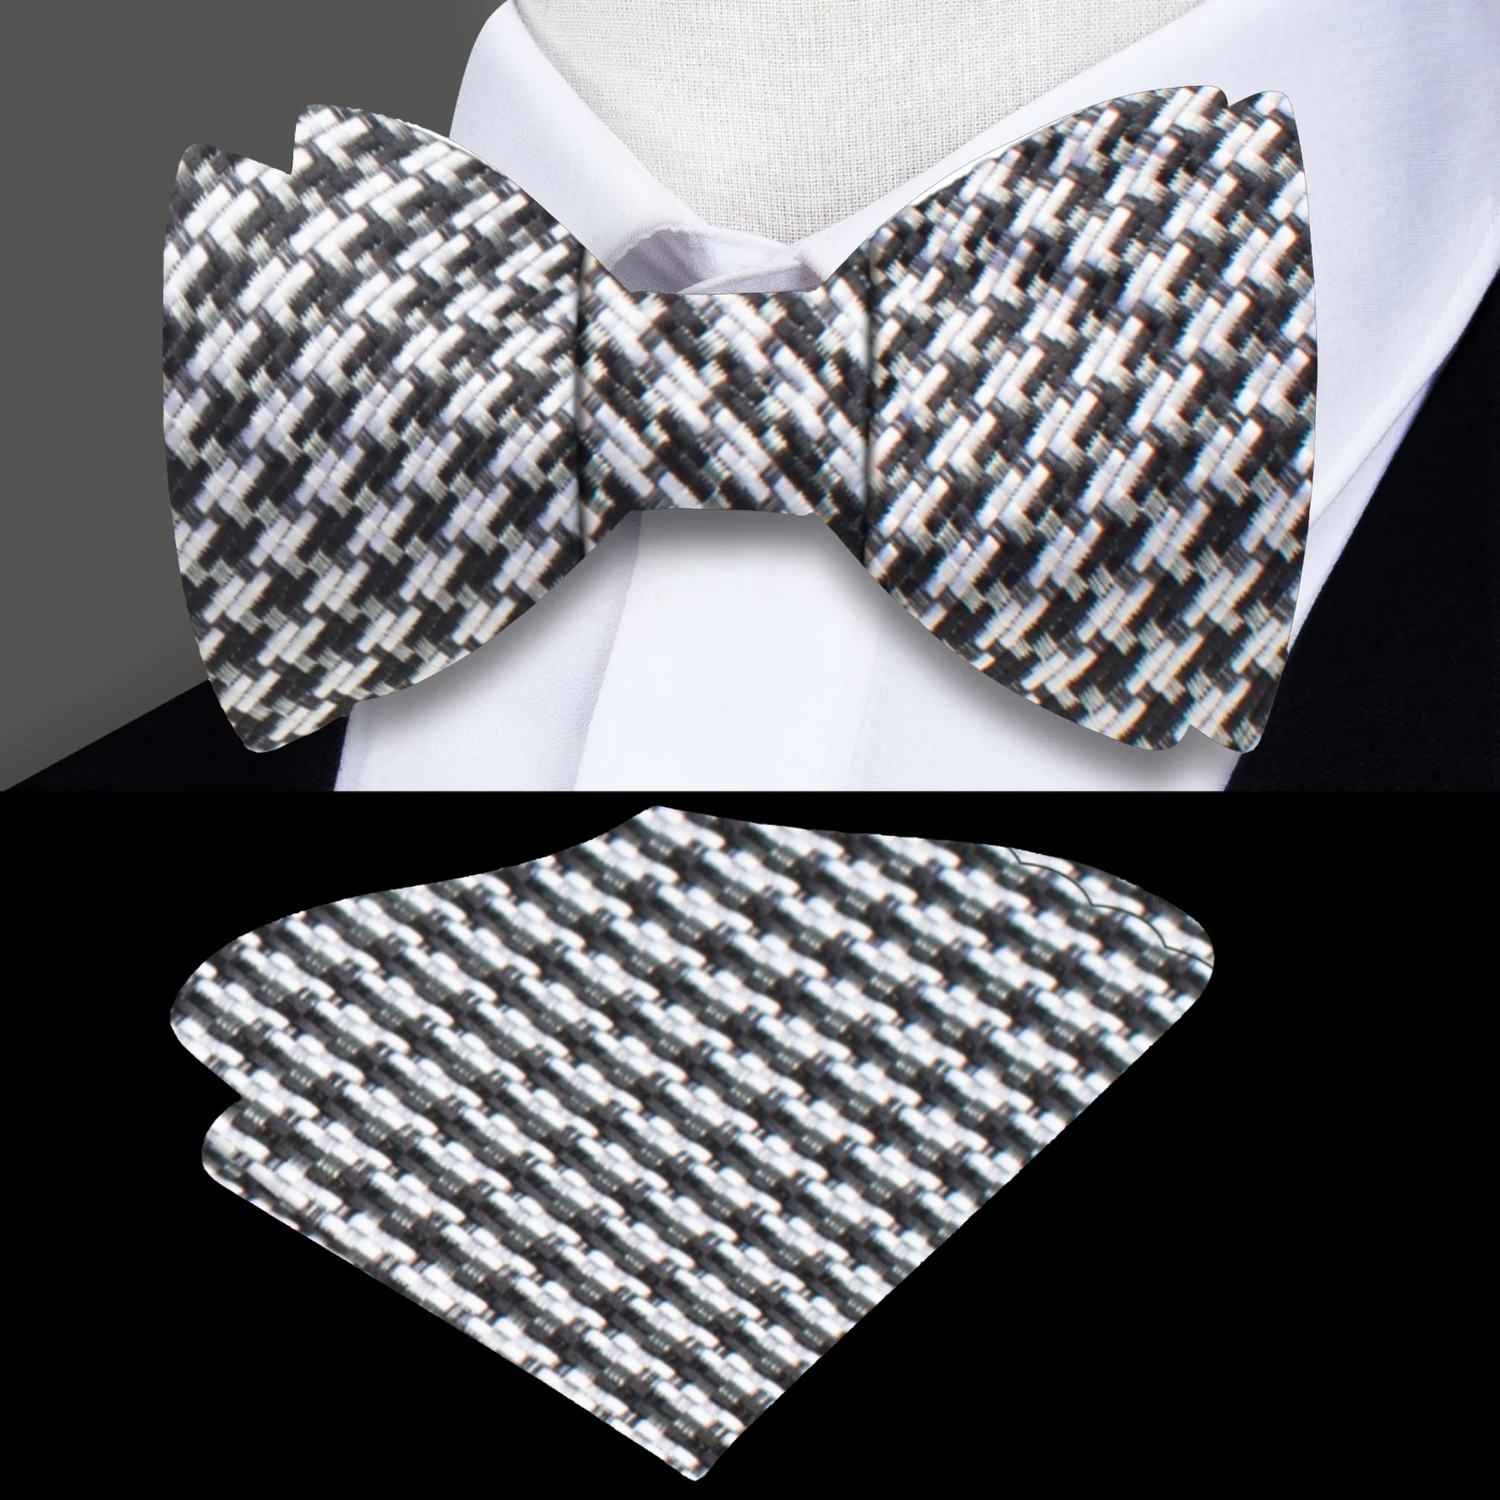 A Black, Grey Geometric Houndstooth Pattern Self Tie Bow Tie and Square